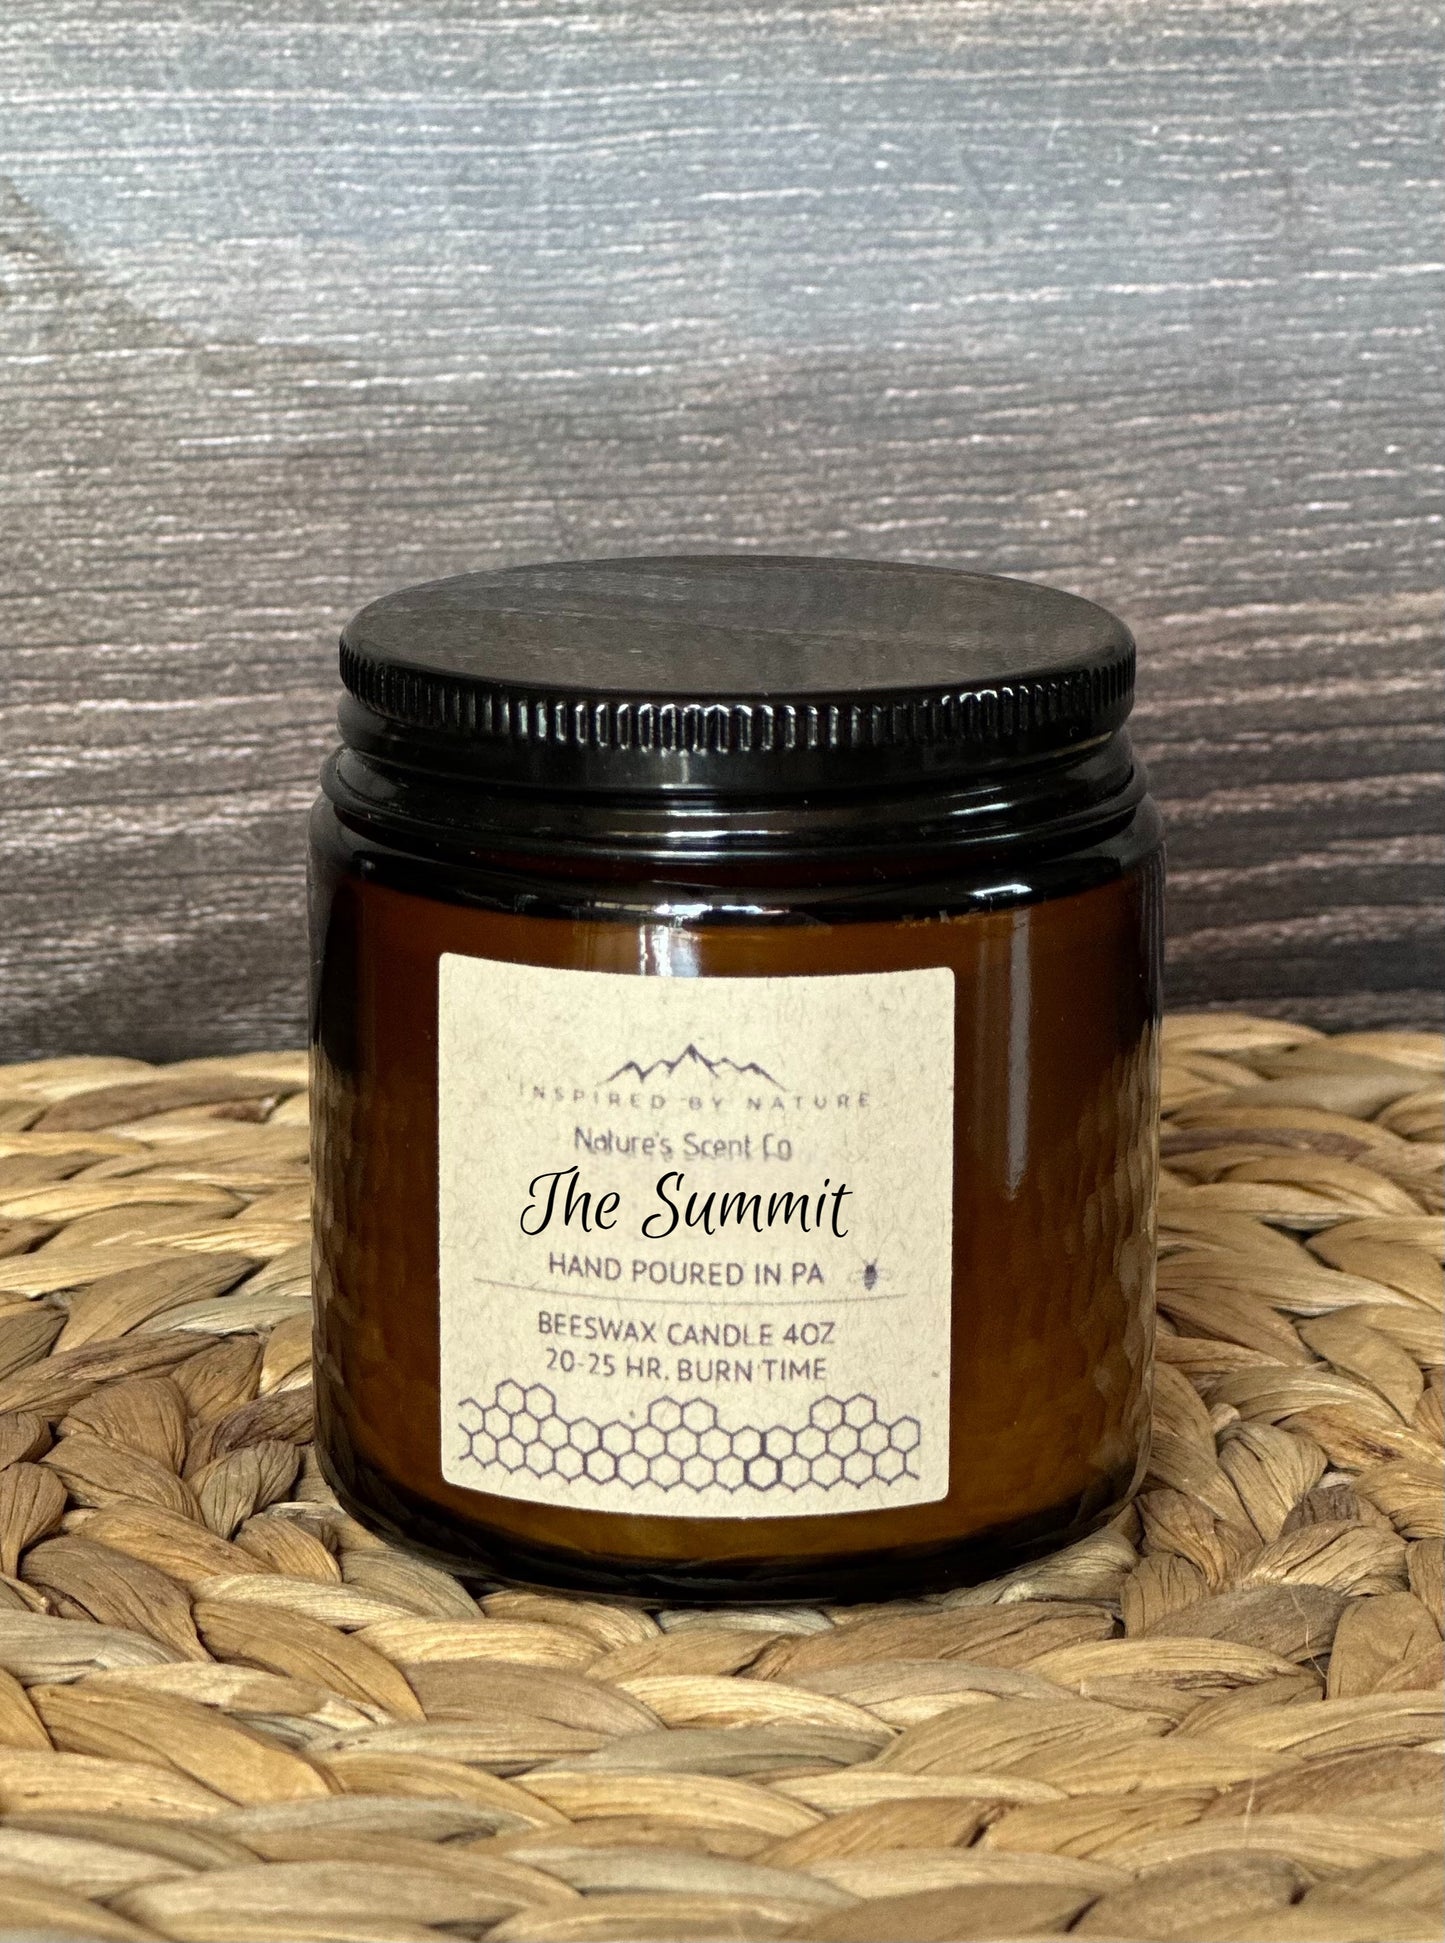 The Summit Jelly Jar Beeswax Candle